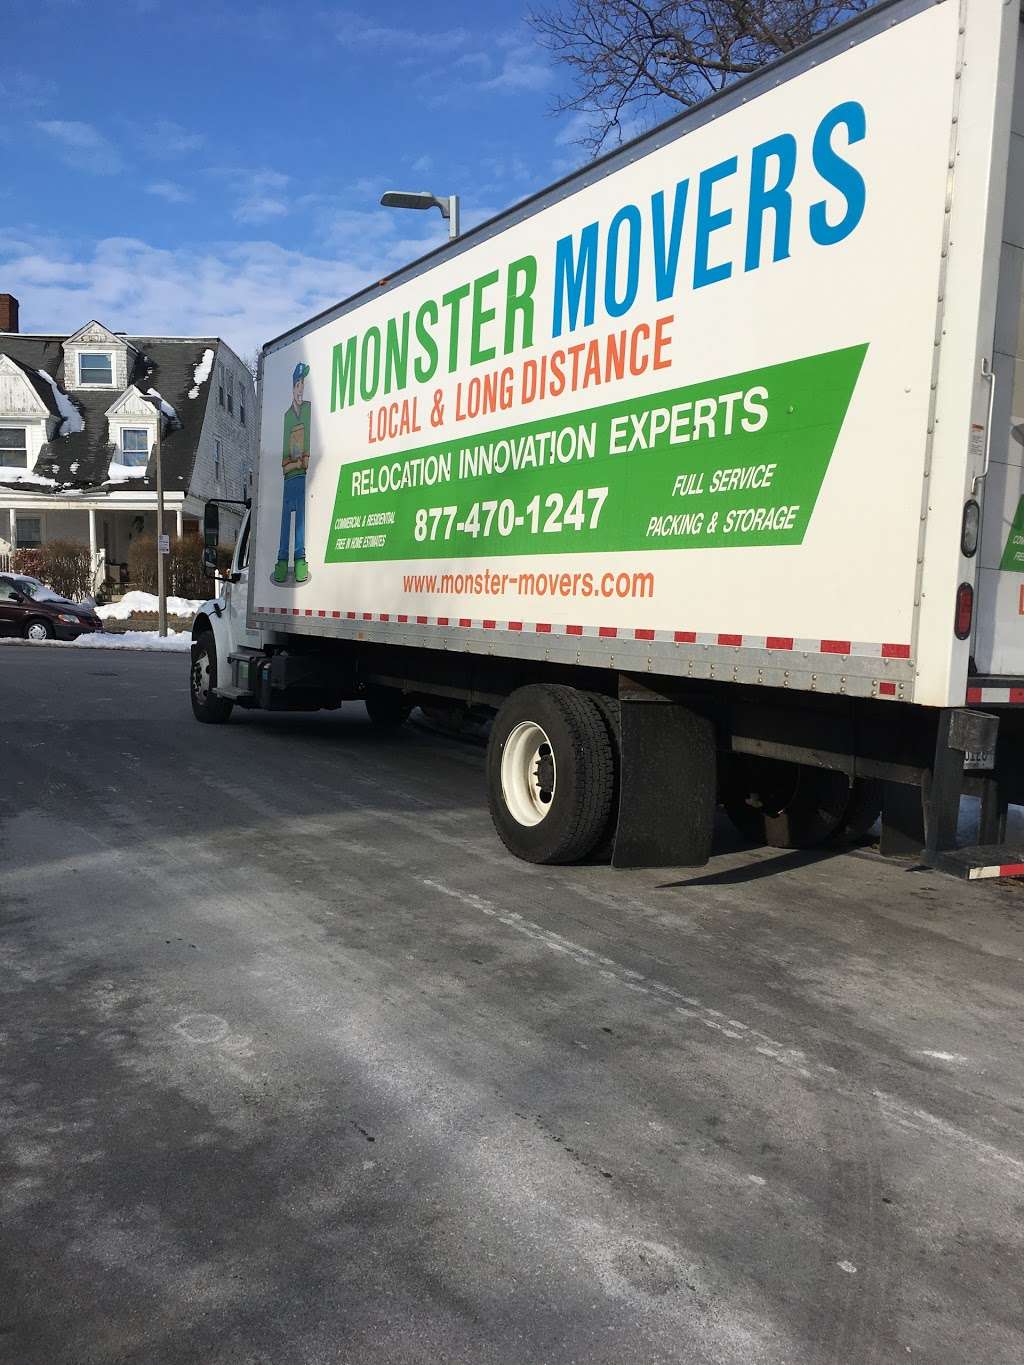 Dorchester Movers | Long Distance Movers | Monster Movers | 11 Hartford St, Dorchester, MA 02125, USA | Phone: (877) 470-1247